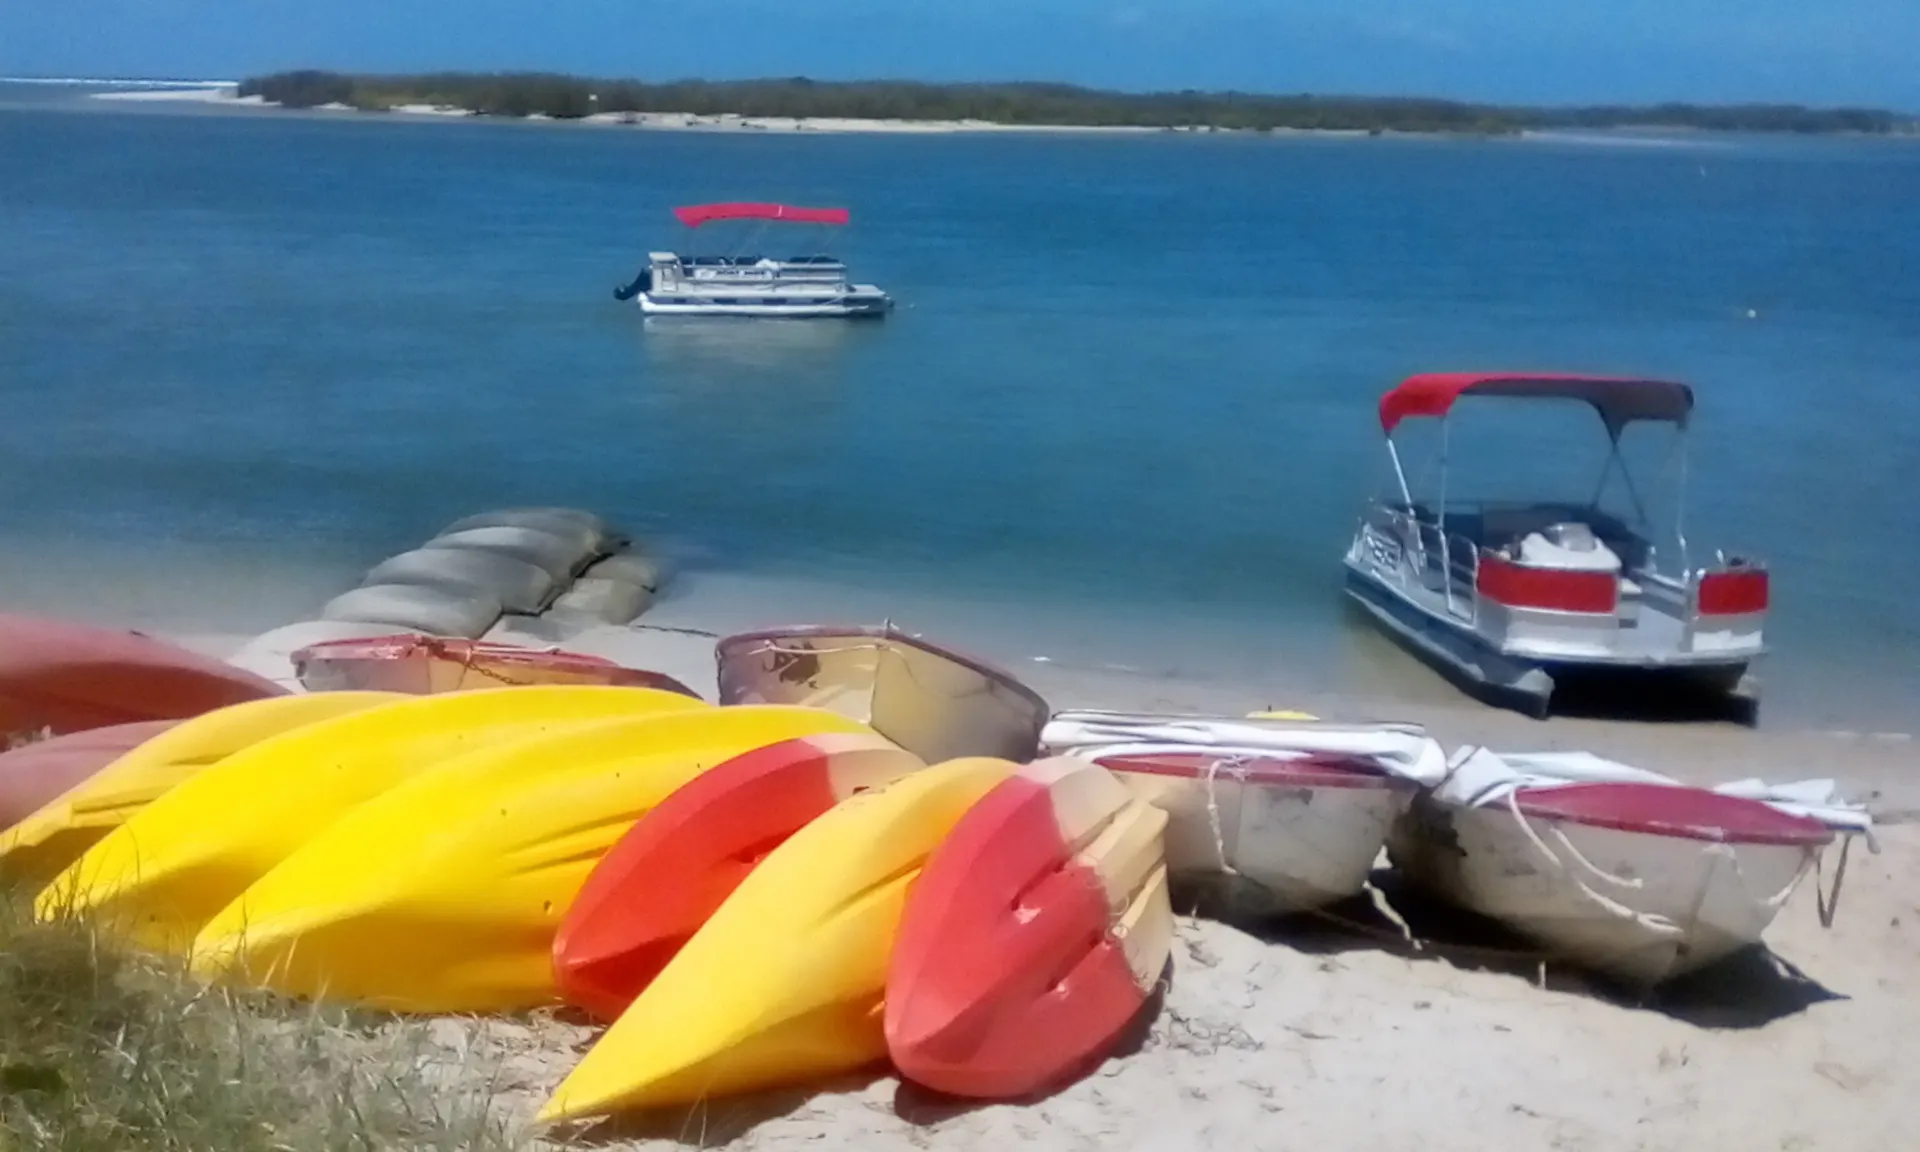 Pontoon Boat on the Beach ready for hire in the beautiful Pumicestone Passage, Caloundra